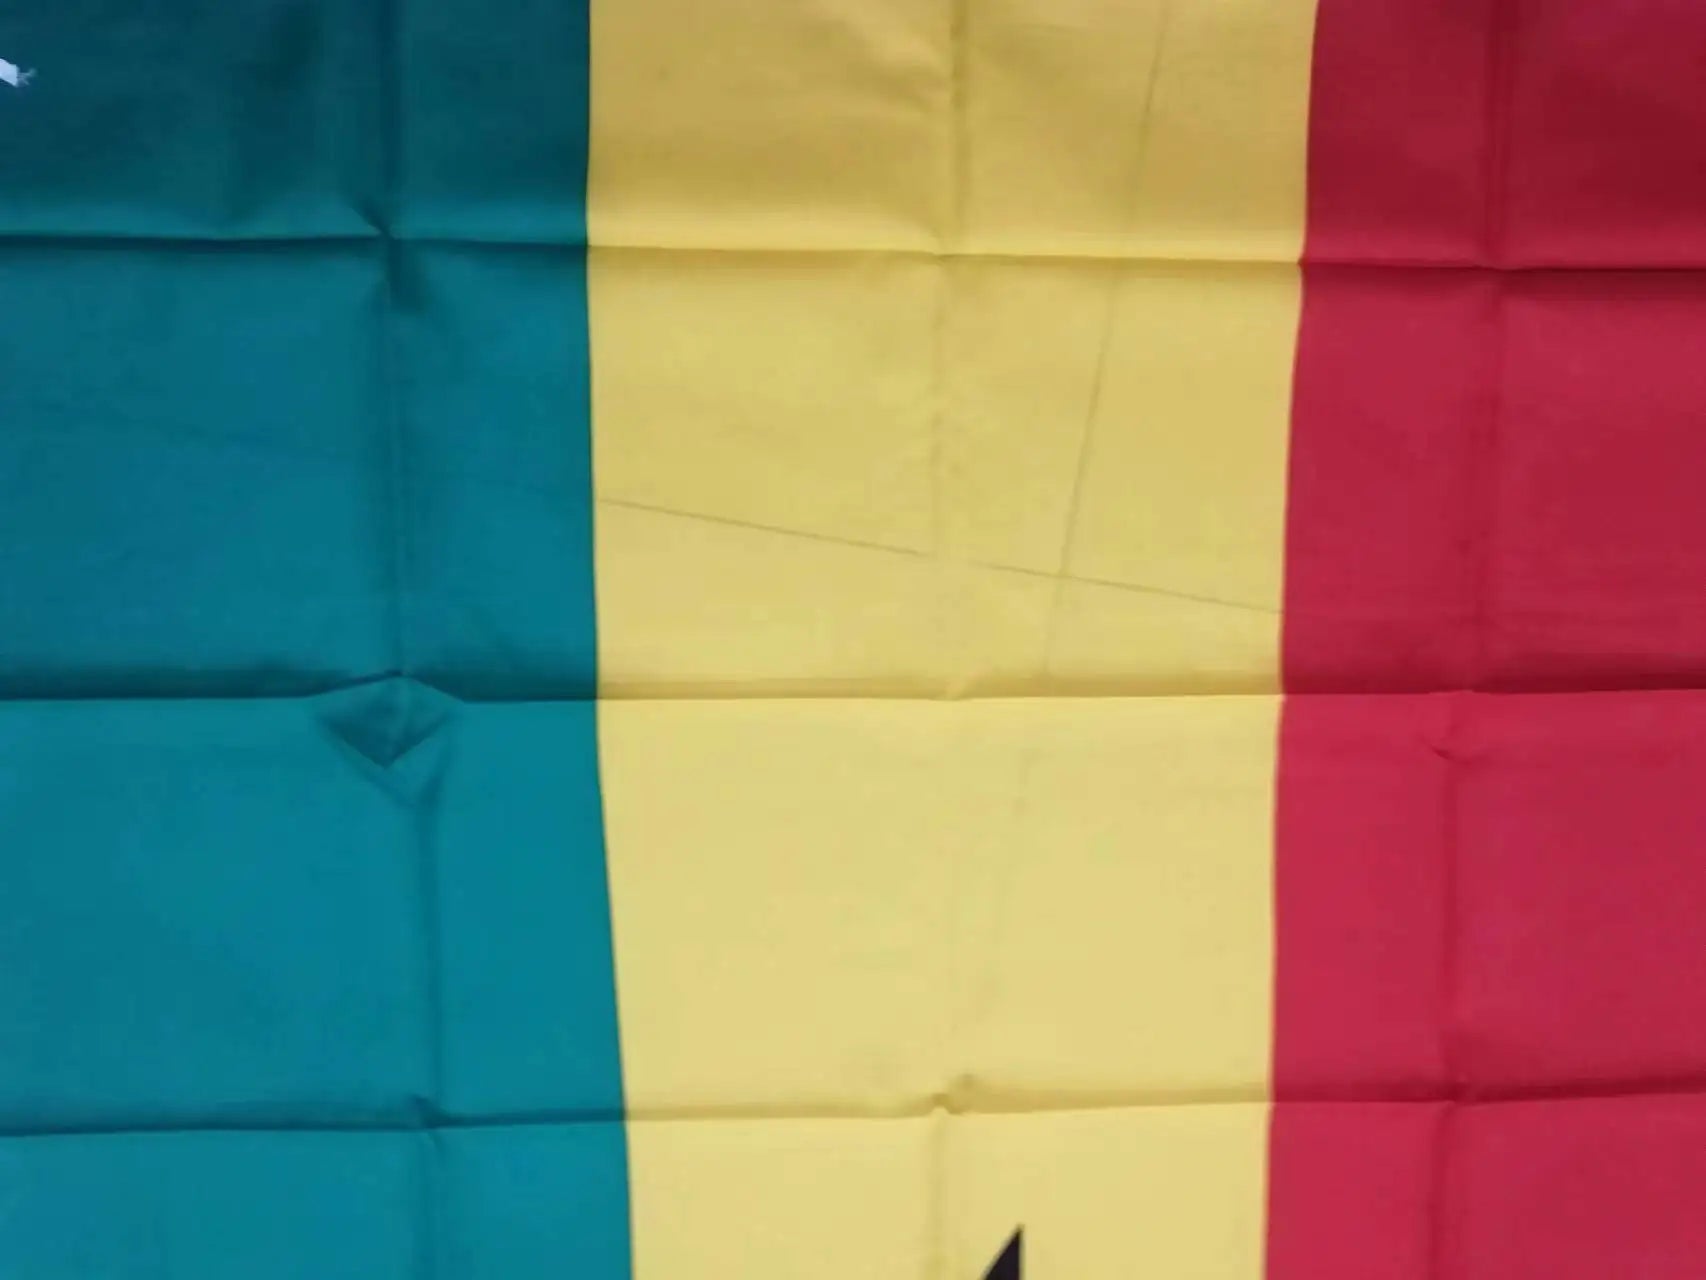 3' x 5' Feet Ghana Polyester Flag – Perfect for Home and Garden Decoration - Flexi Africa - Free Delivery www.flexiafrica.com